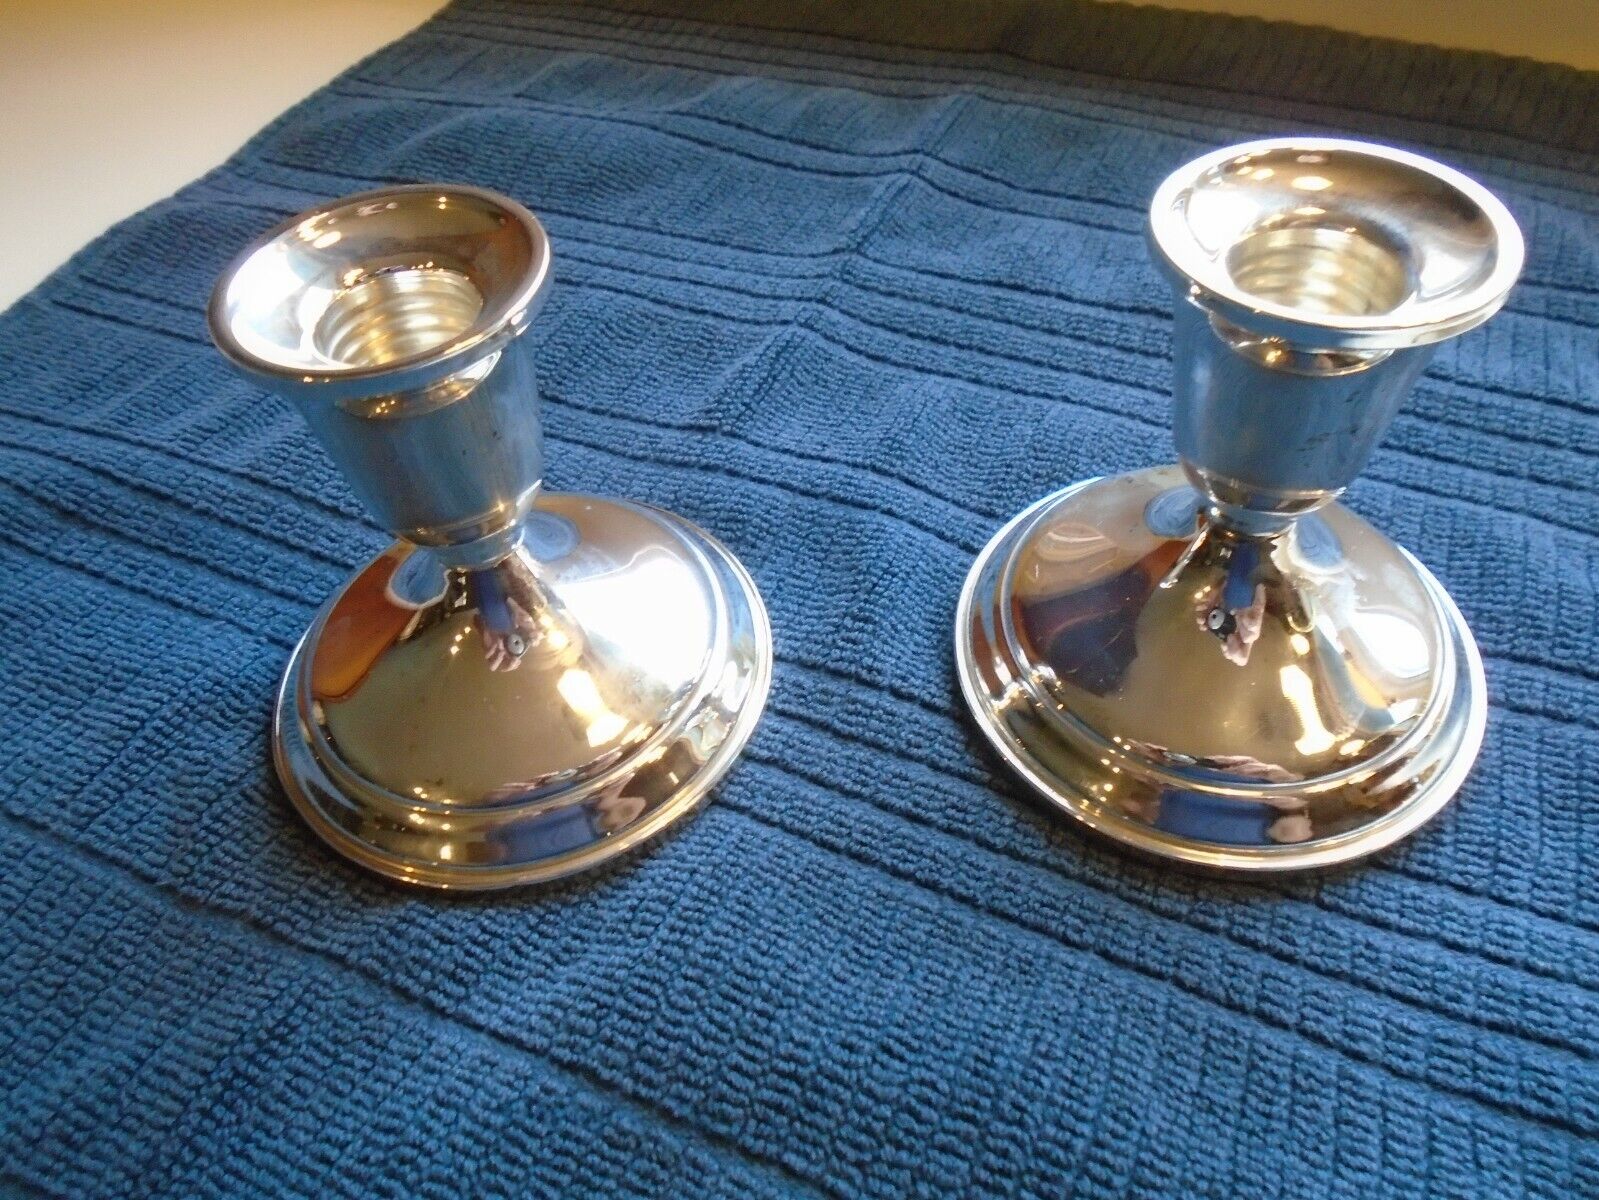 High quality new Vintage Pair Translated Of Towle Sterling Holders #700 Candle Silver Stick